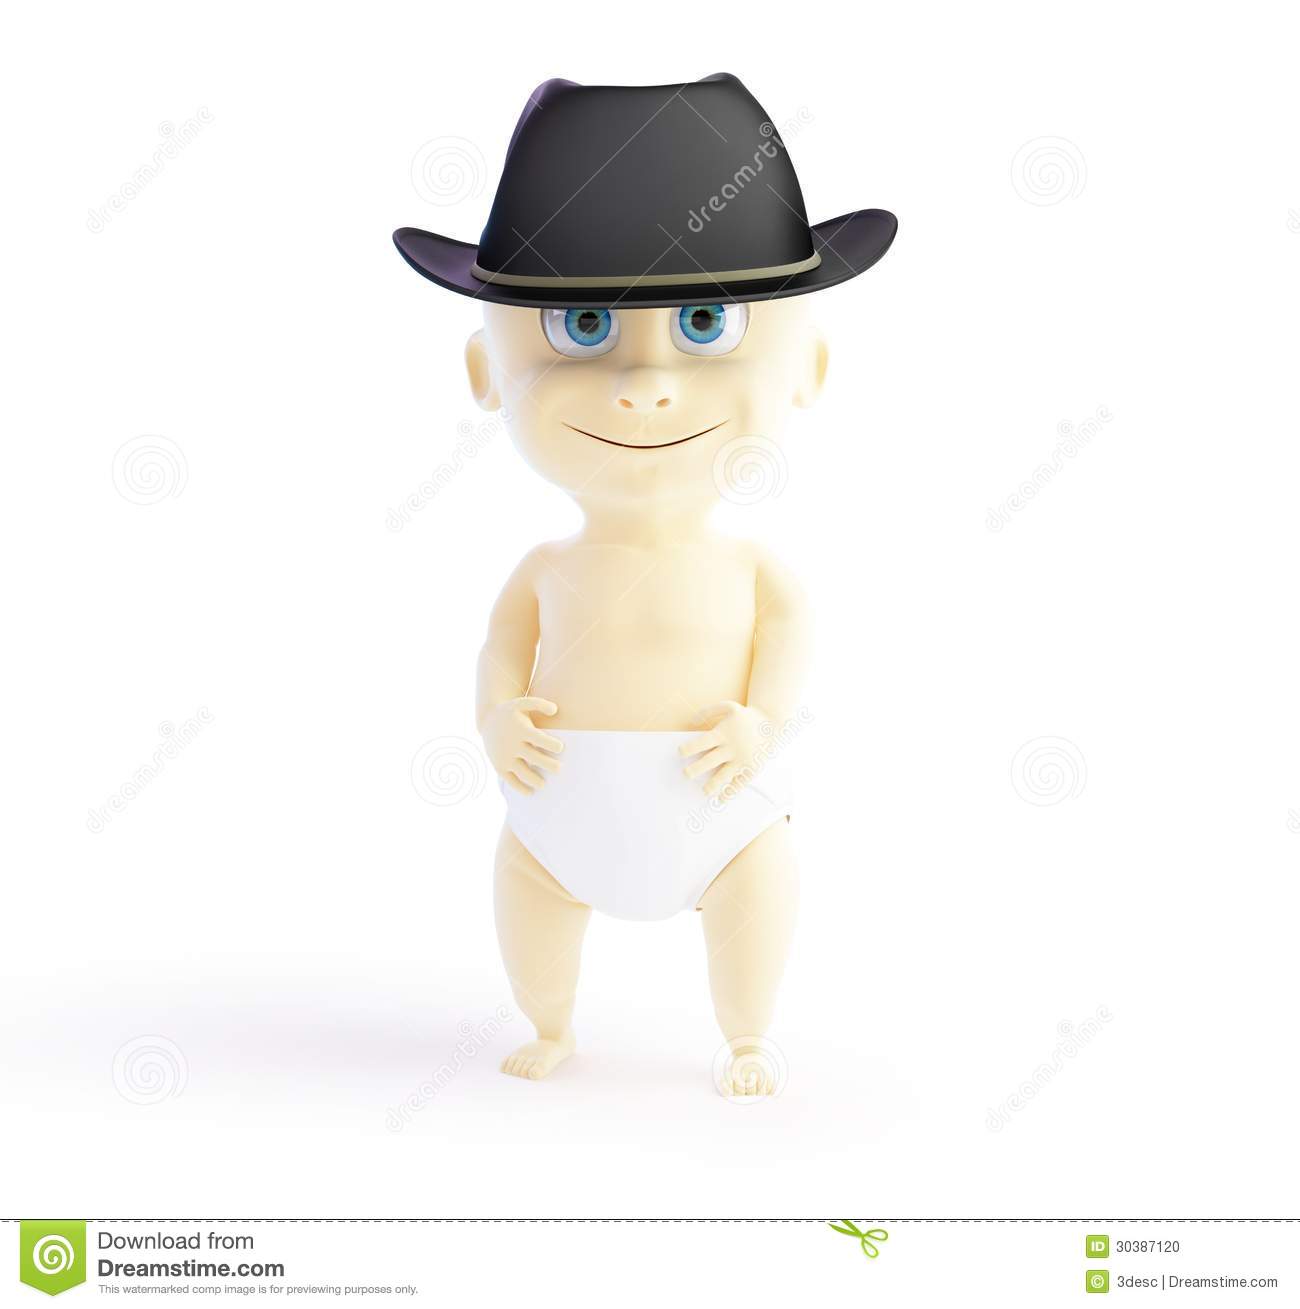 Child In A Hat Mafia 3d Illustrations On A White Background